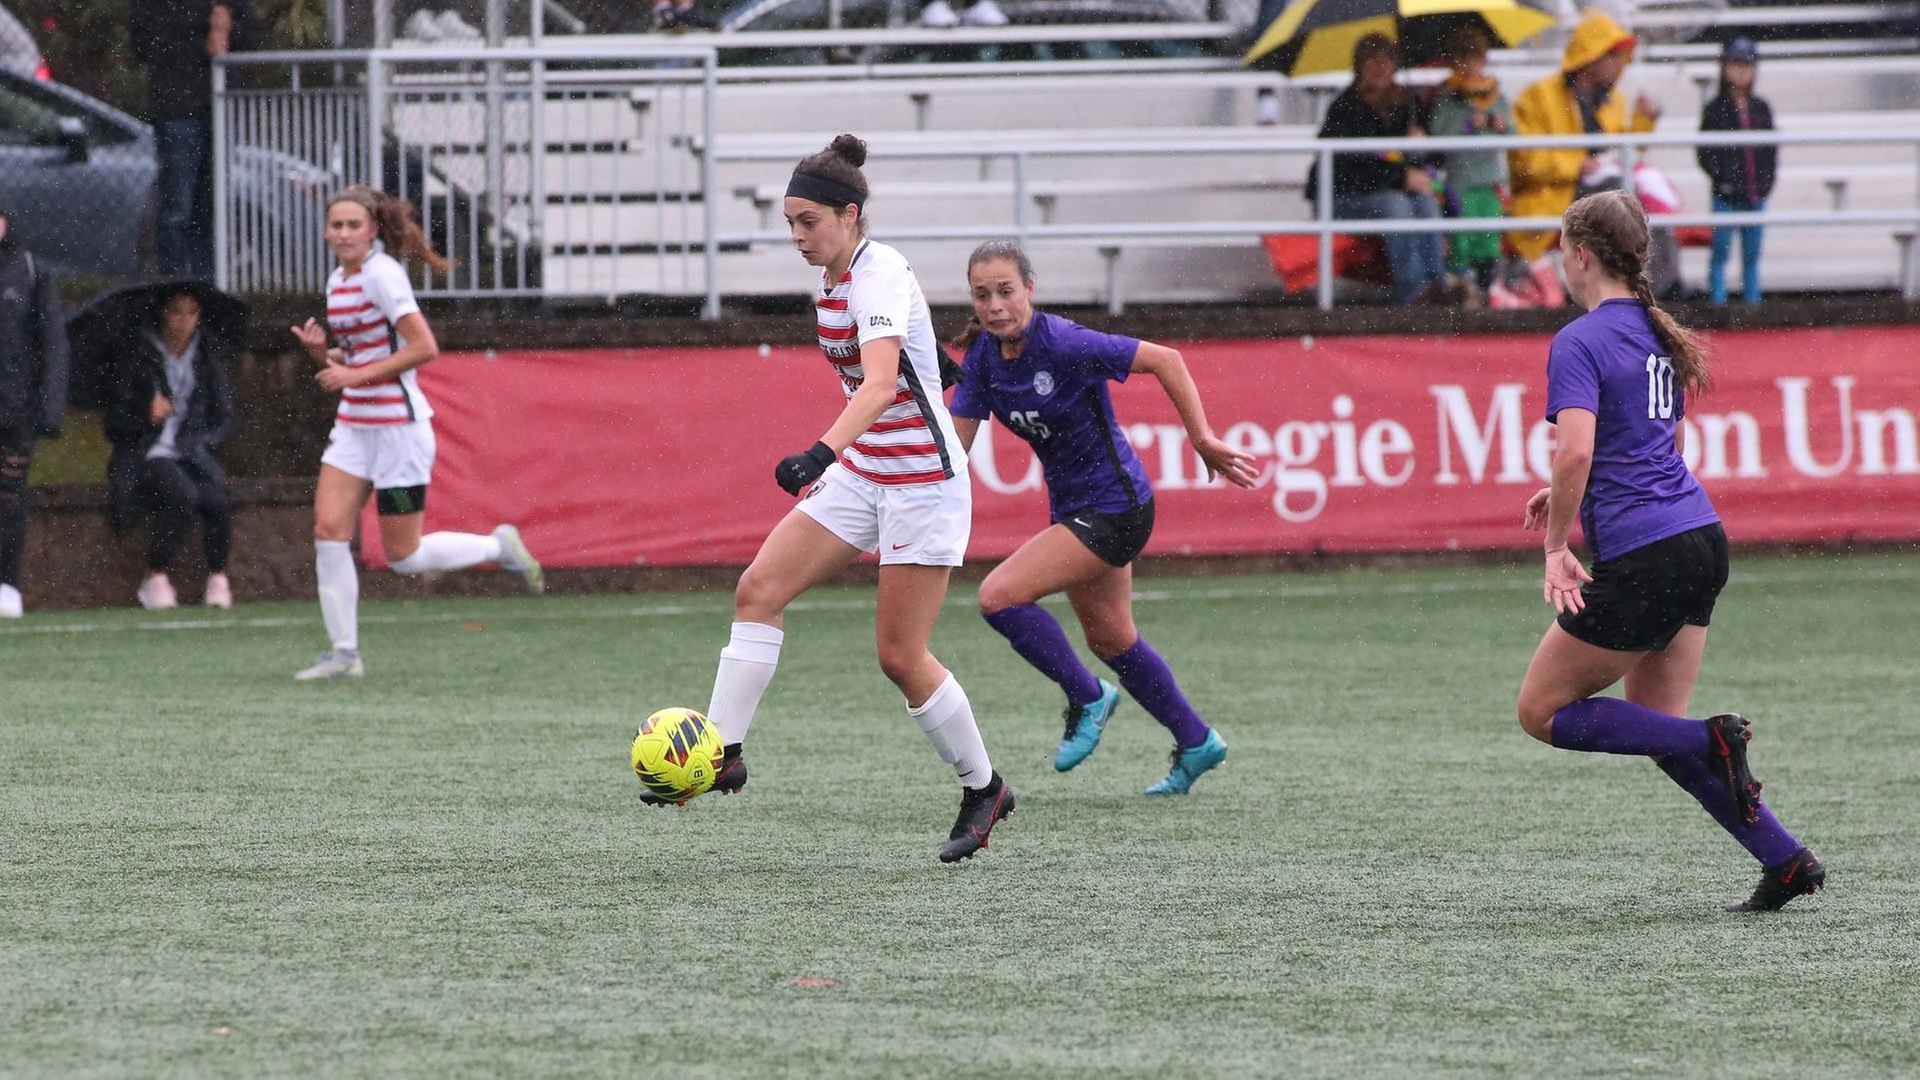 women's soccer player wearing white and red striped jersey and white shorts dribbles the ball with two players in purple uniforms chasing her